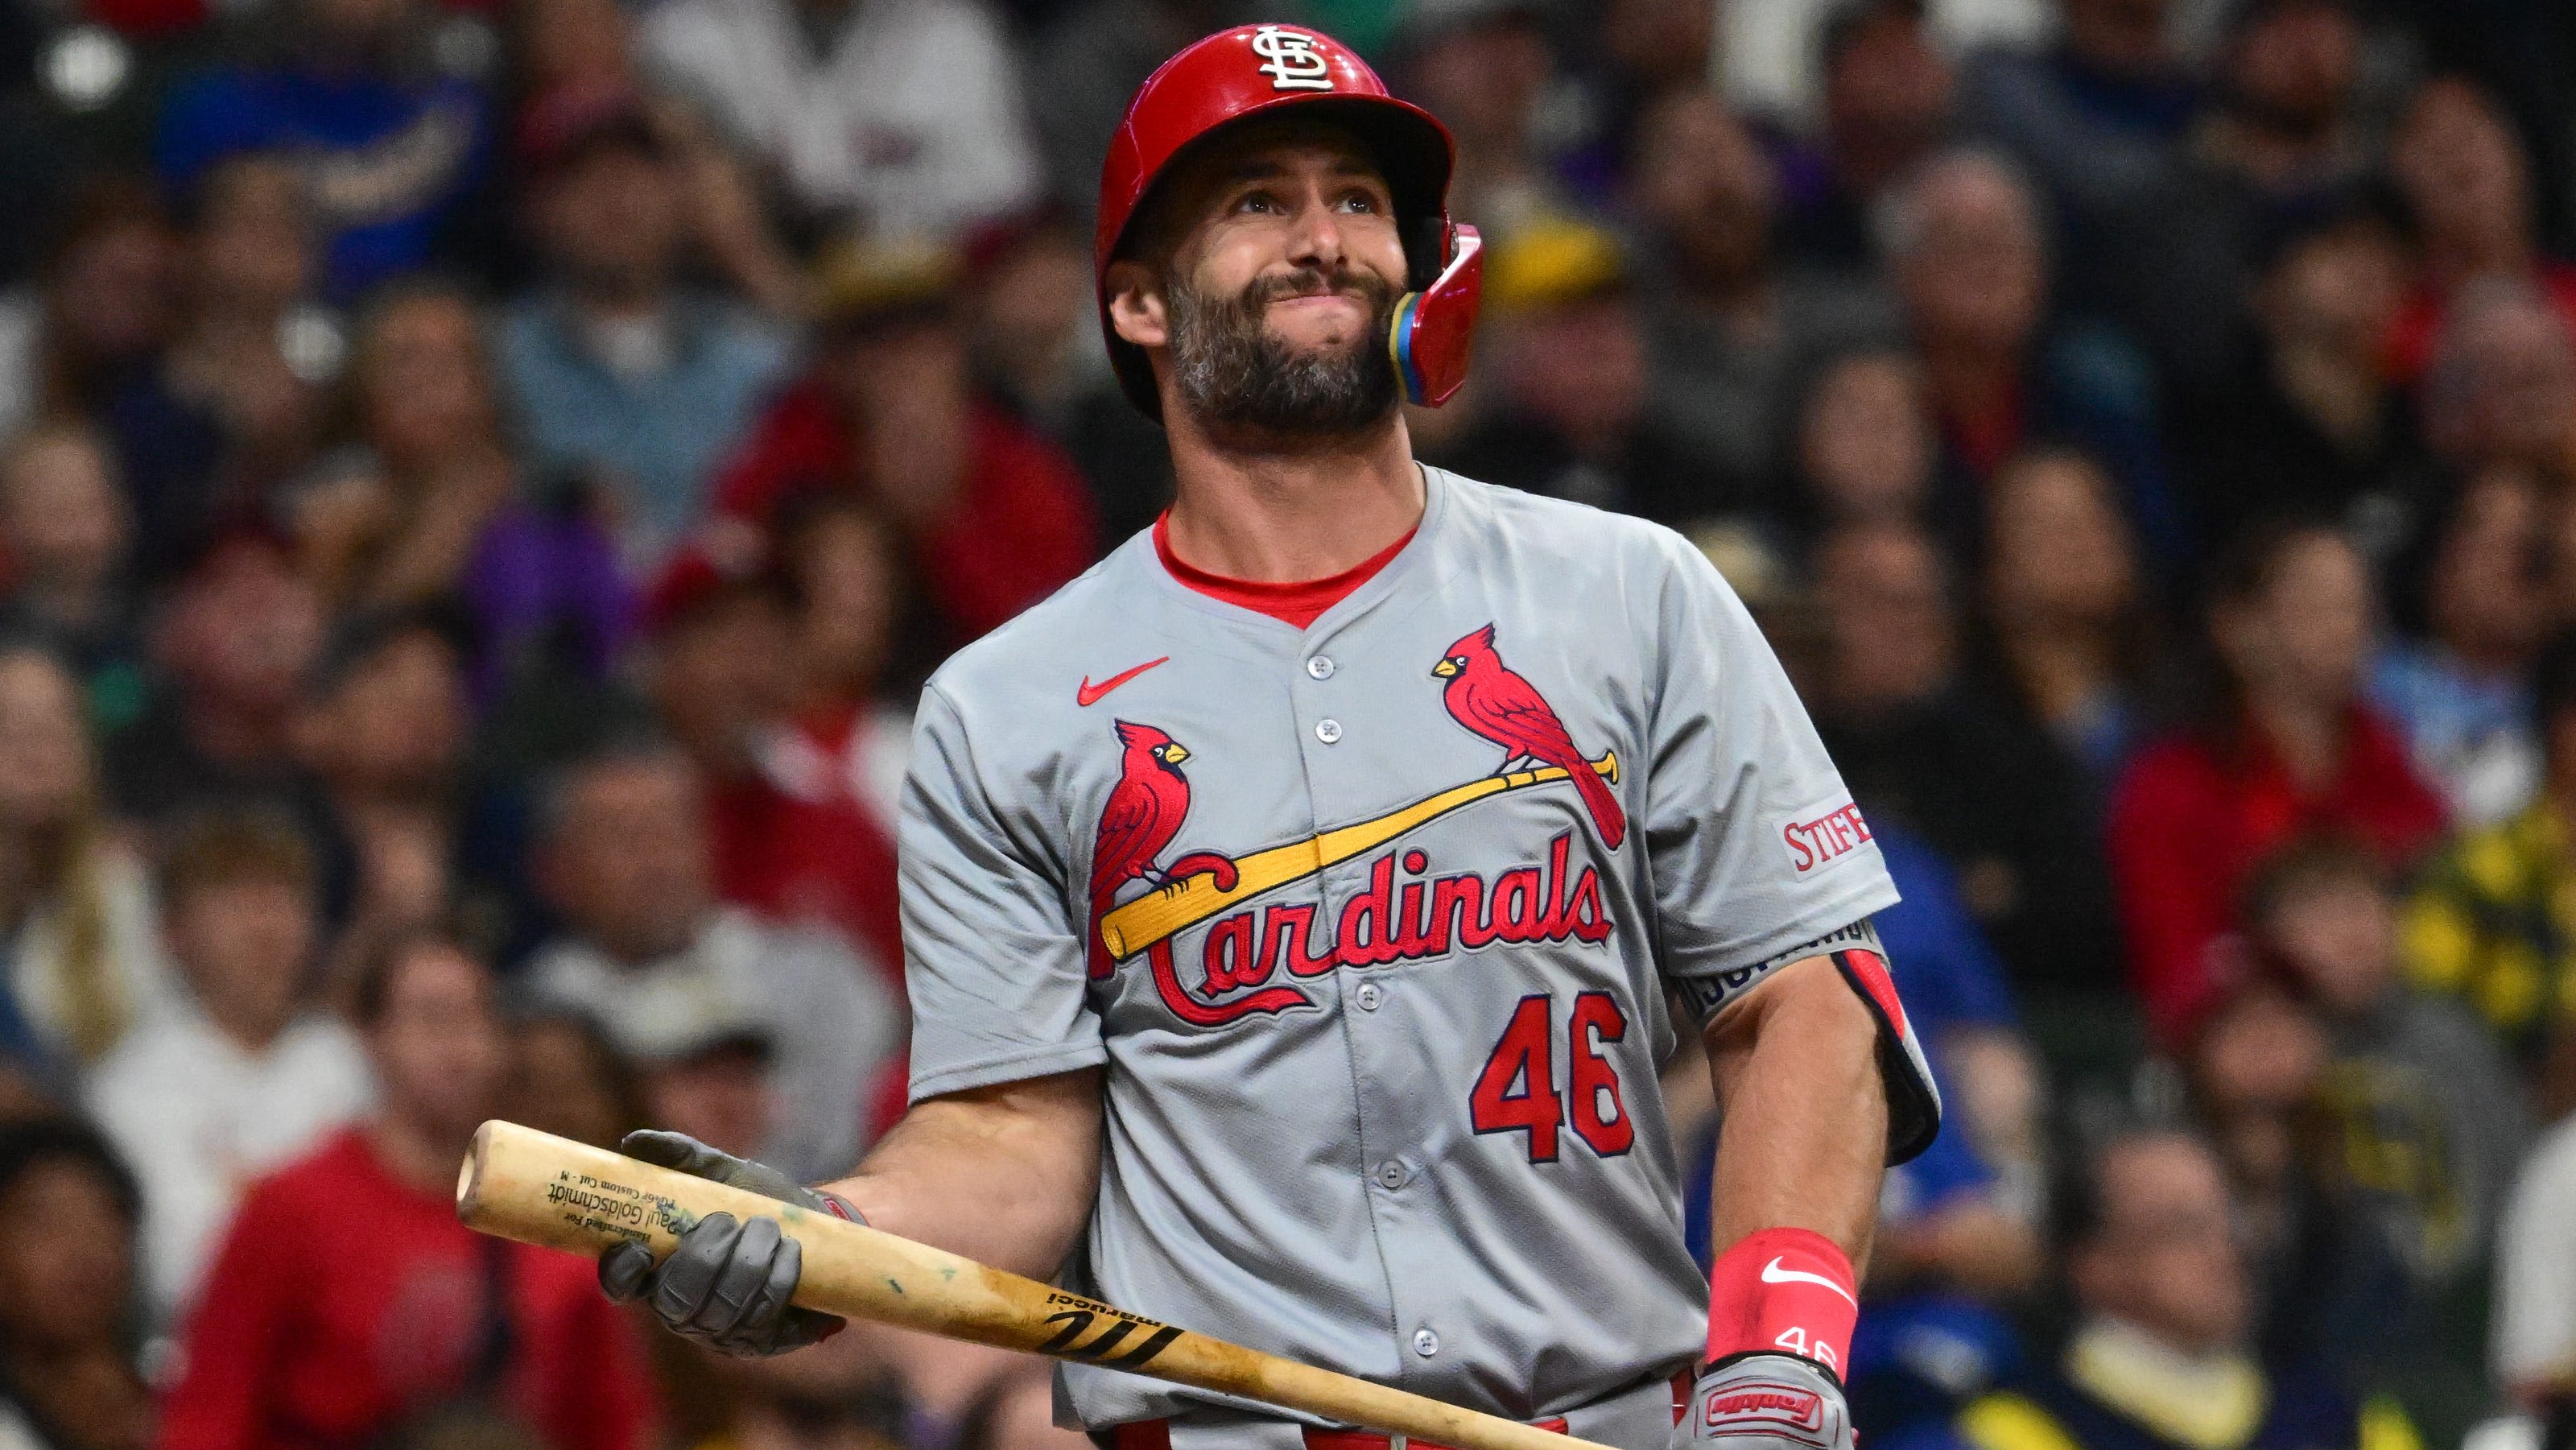 MLB power rankings: Cardinals back in NL Central basement - and on track for dubious mark